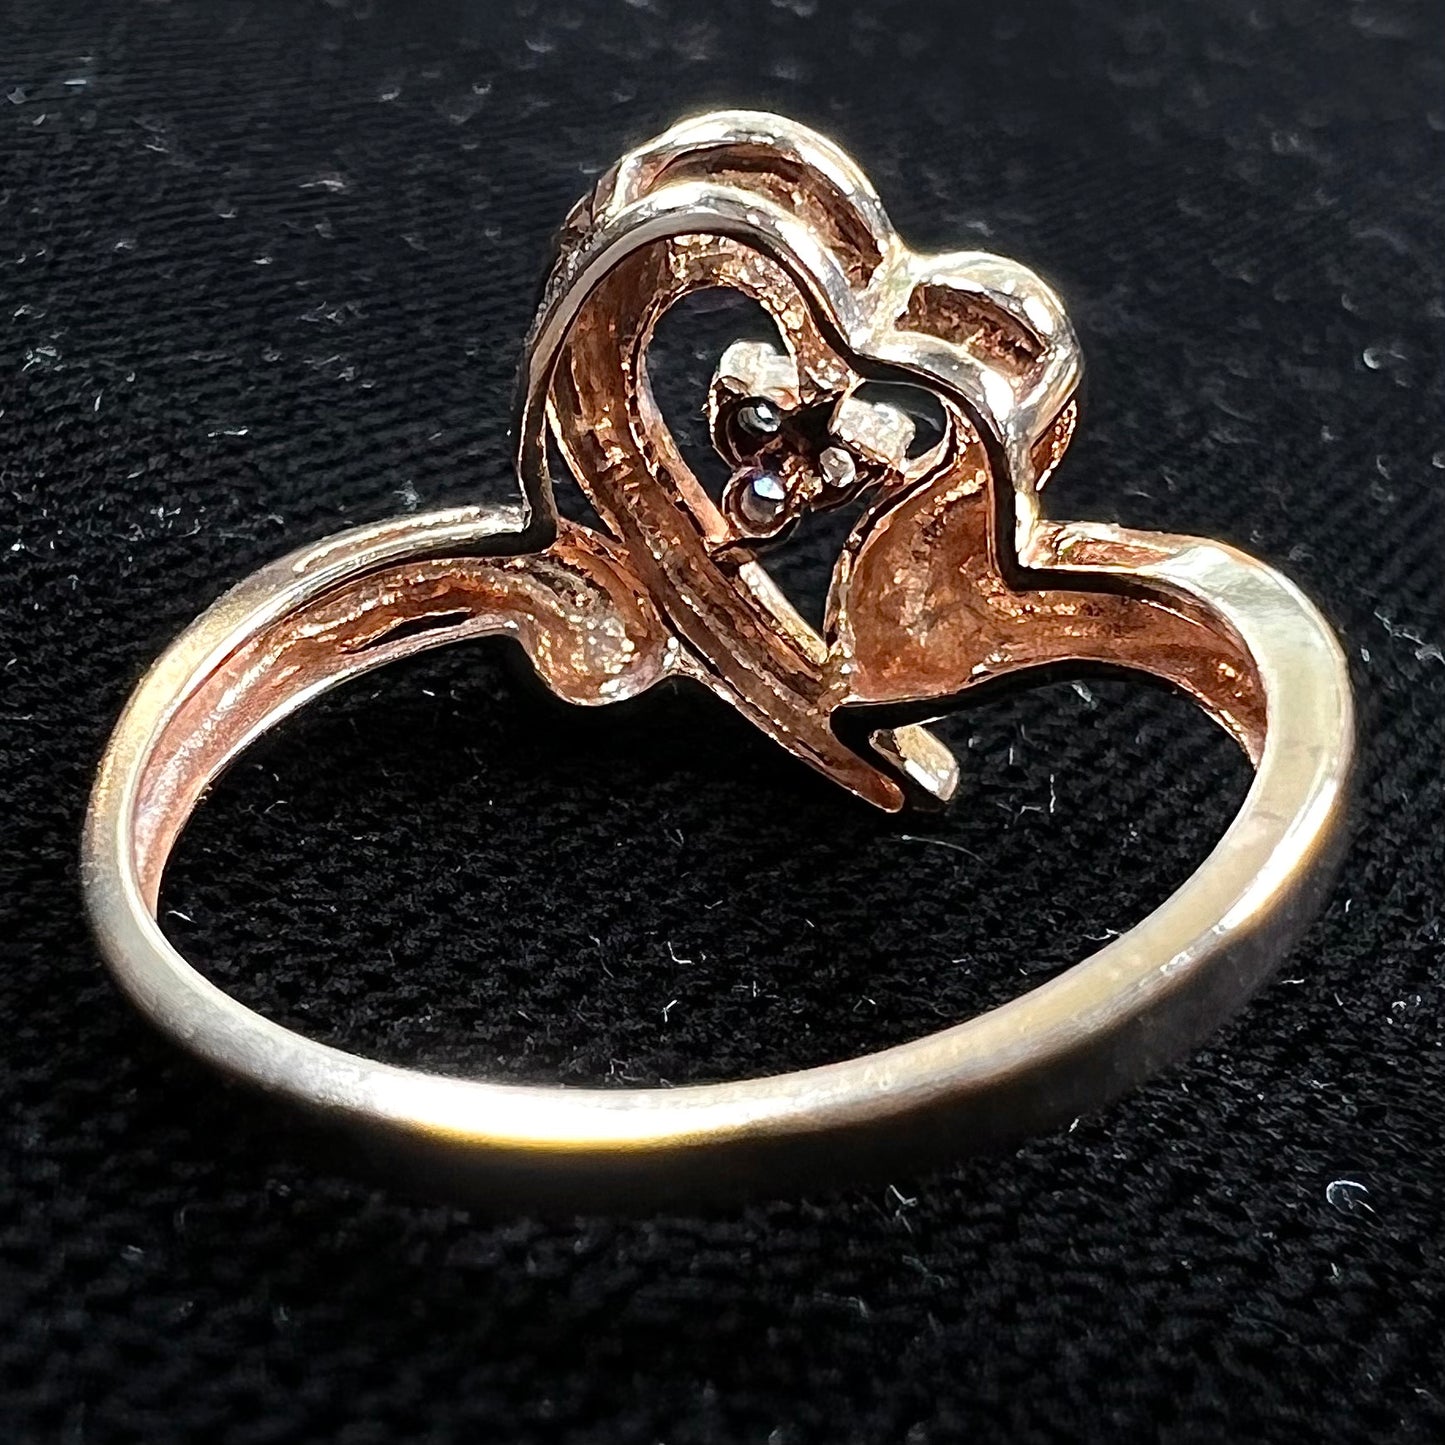 A rose gold heart ring set with three round cut diamonds.